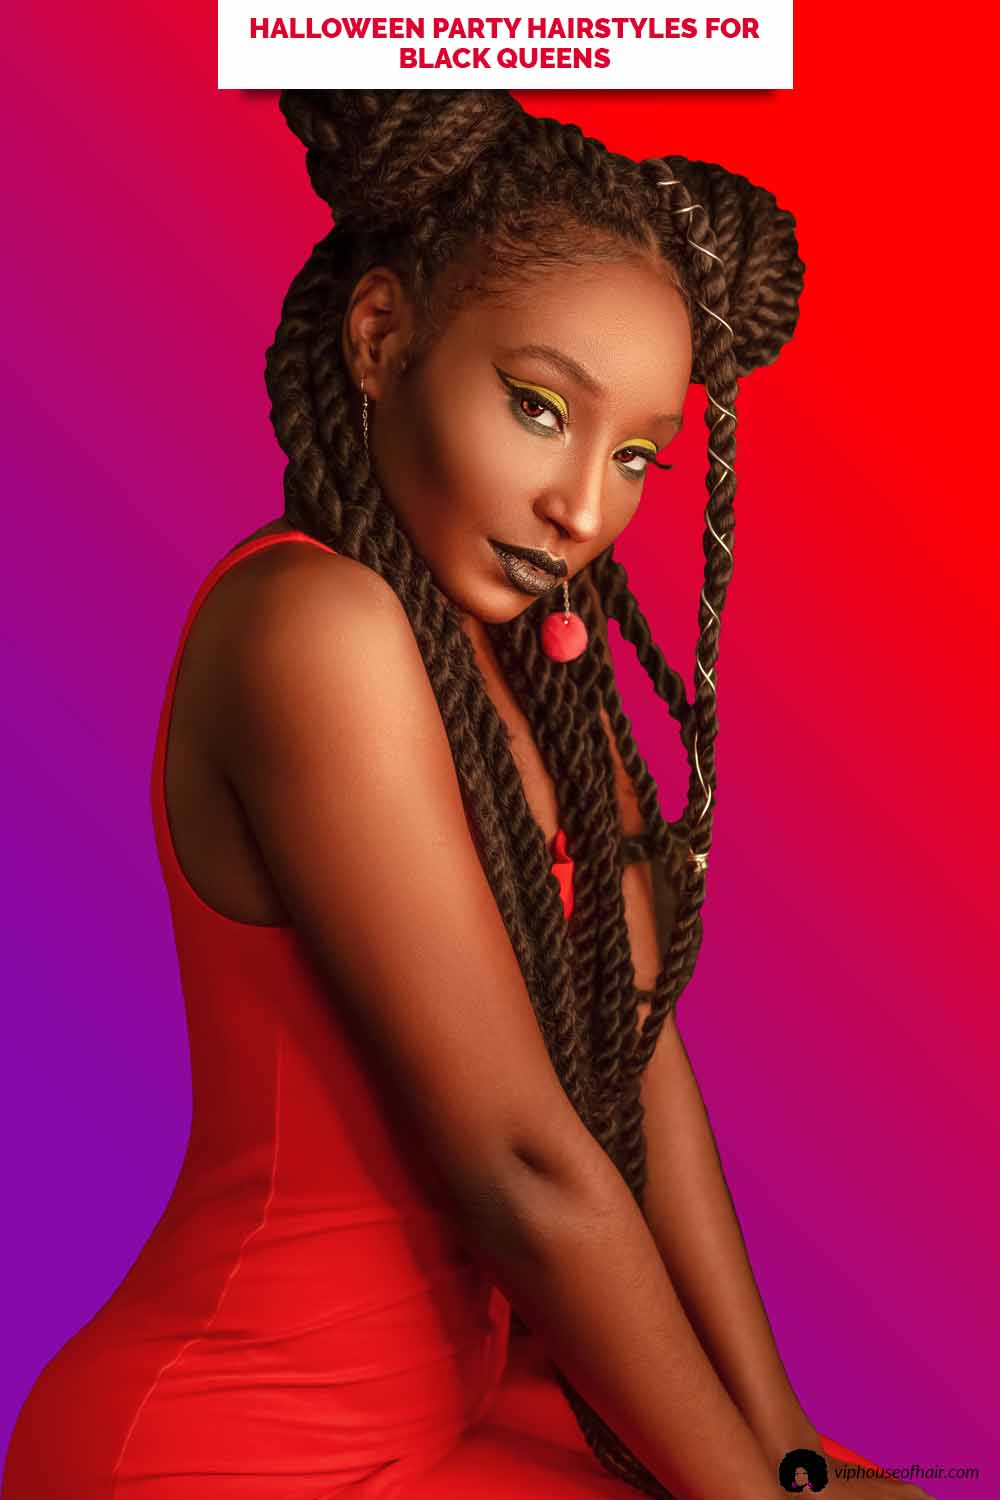 Halloween Party Hairstyles For Black Queens